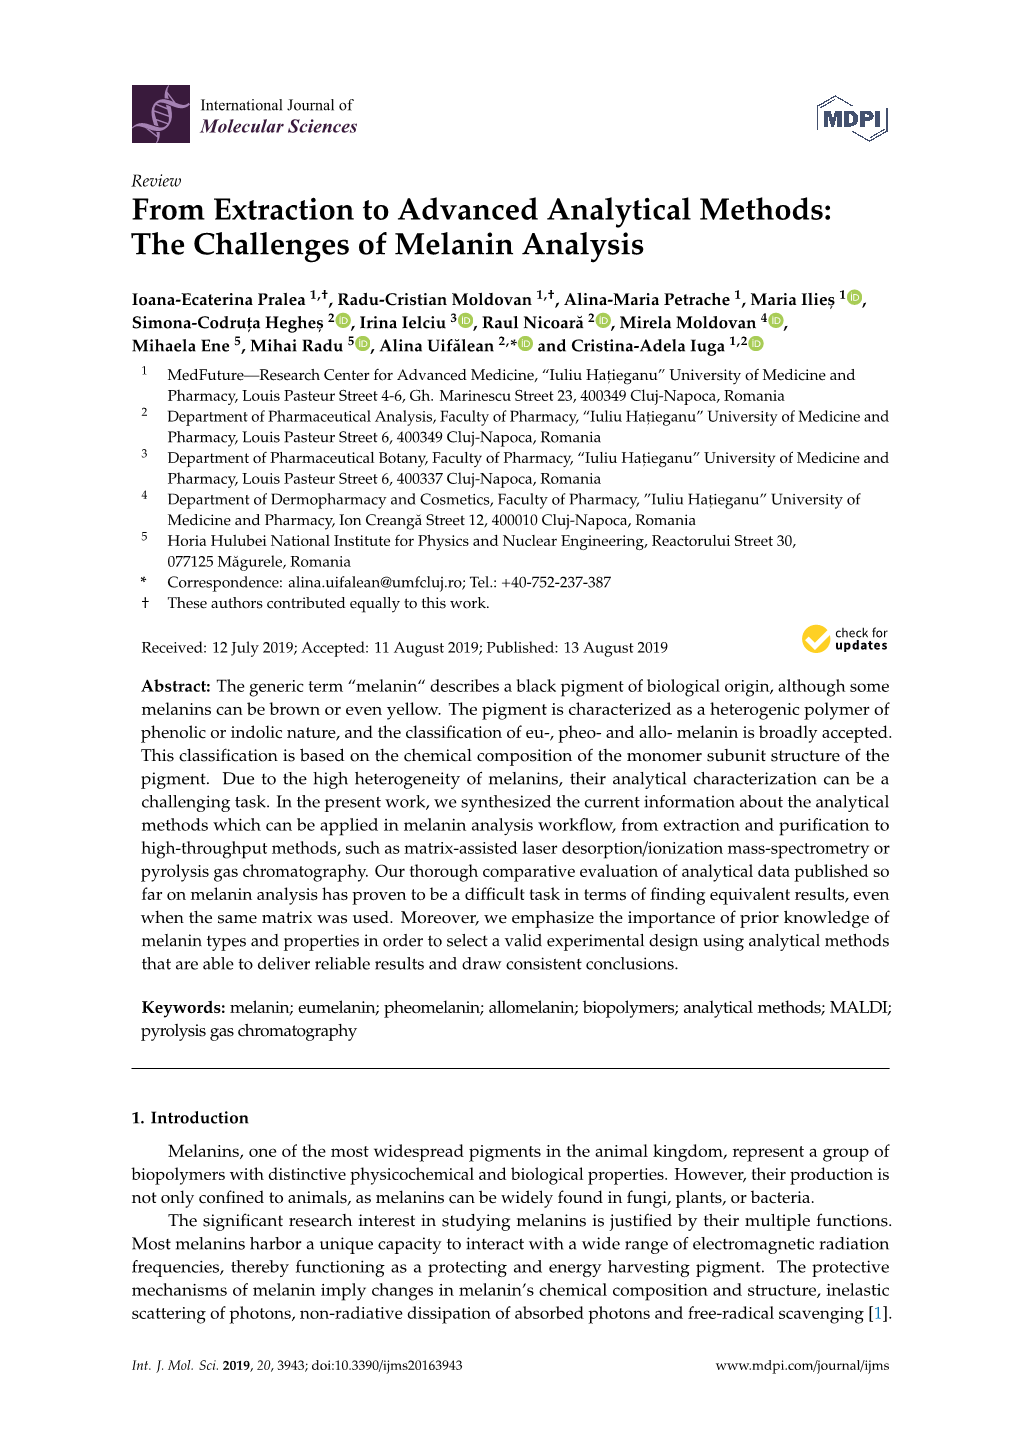 The Challenges of Melanin Analysis